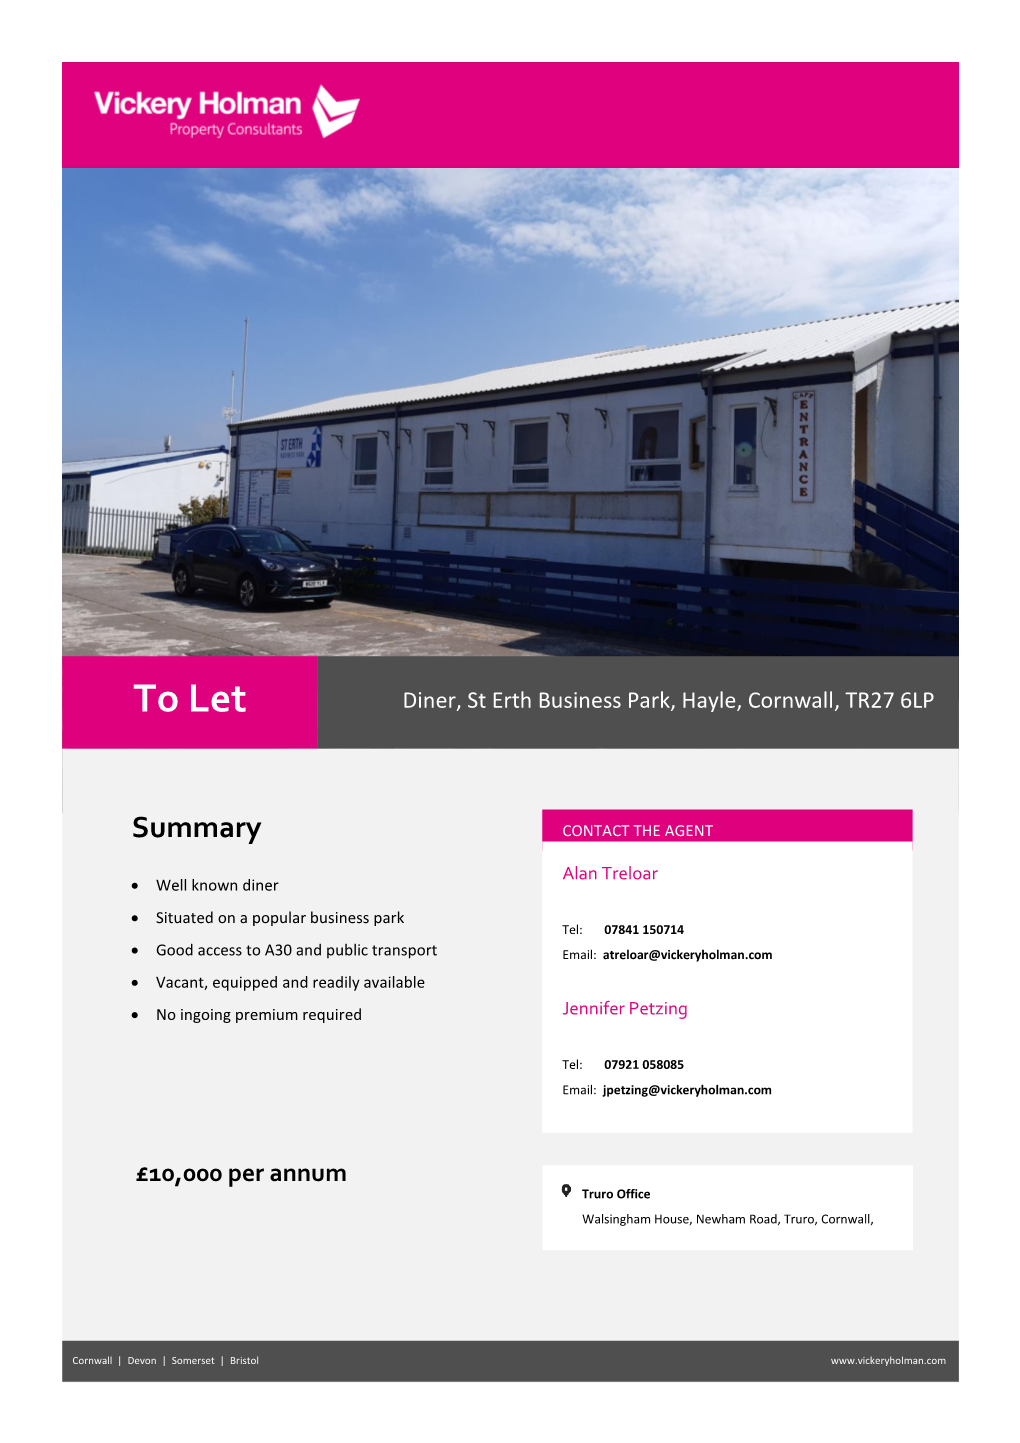 To Let Diner, St Erth Business Park, Hayle, Cornwall, TR27 6LP